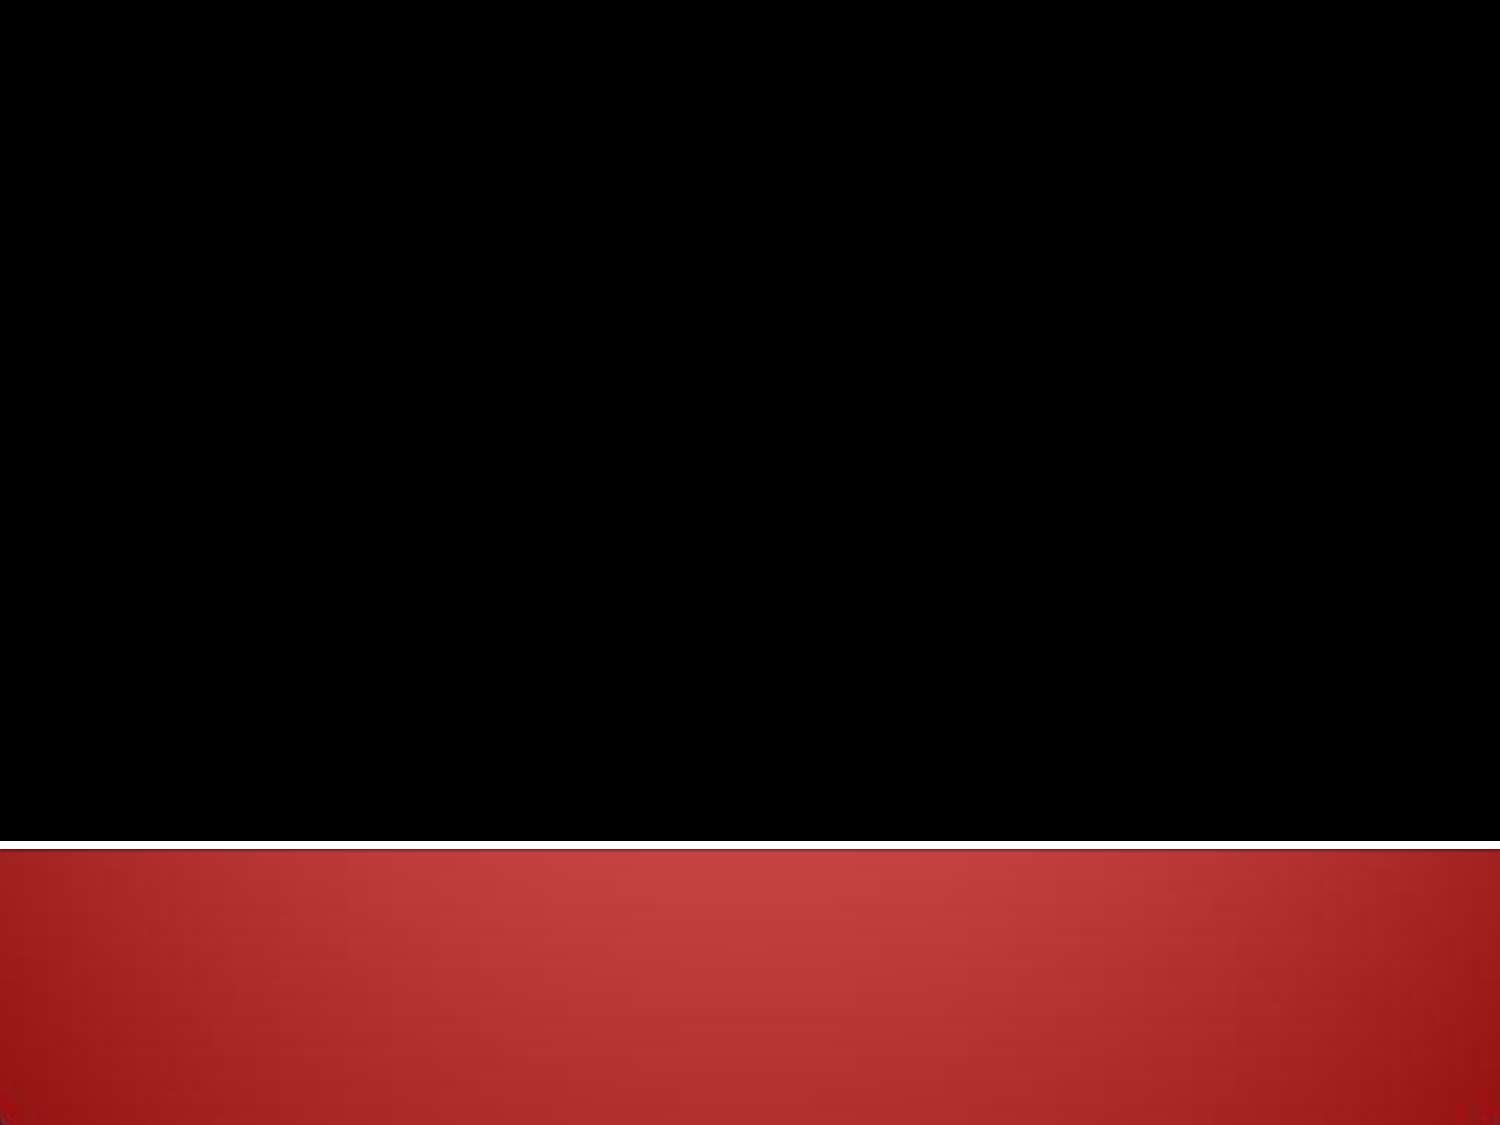 Red Black And White Background Wallpaper For Powerpoint Presentations